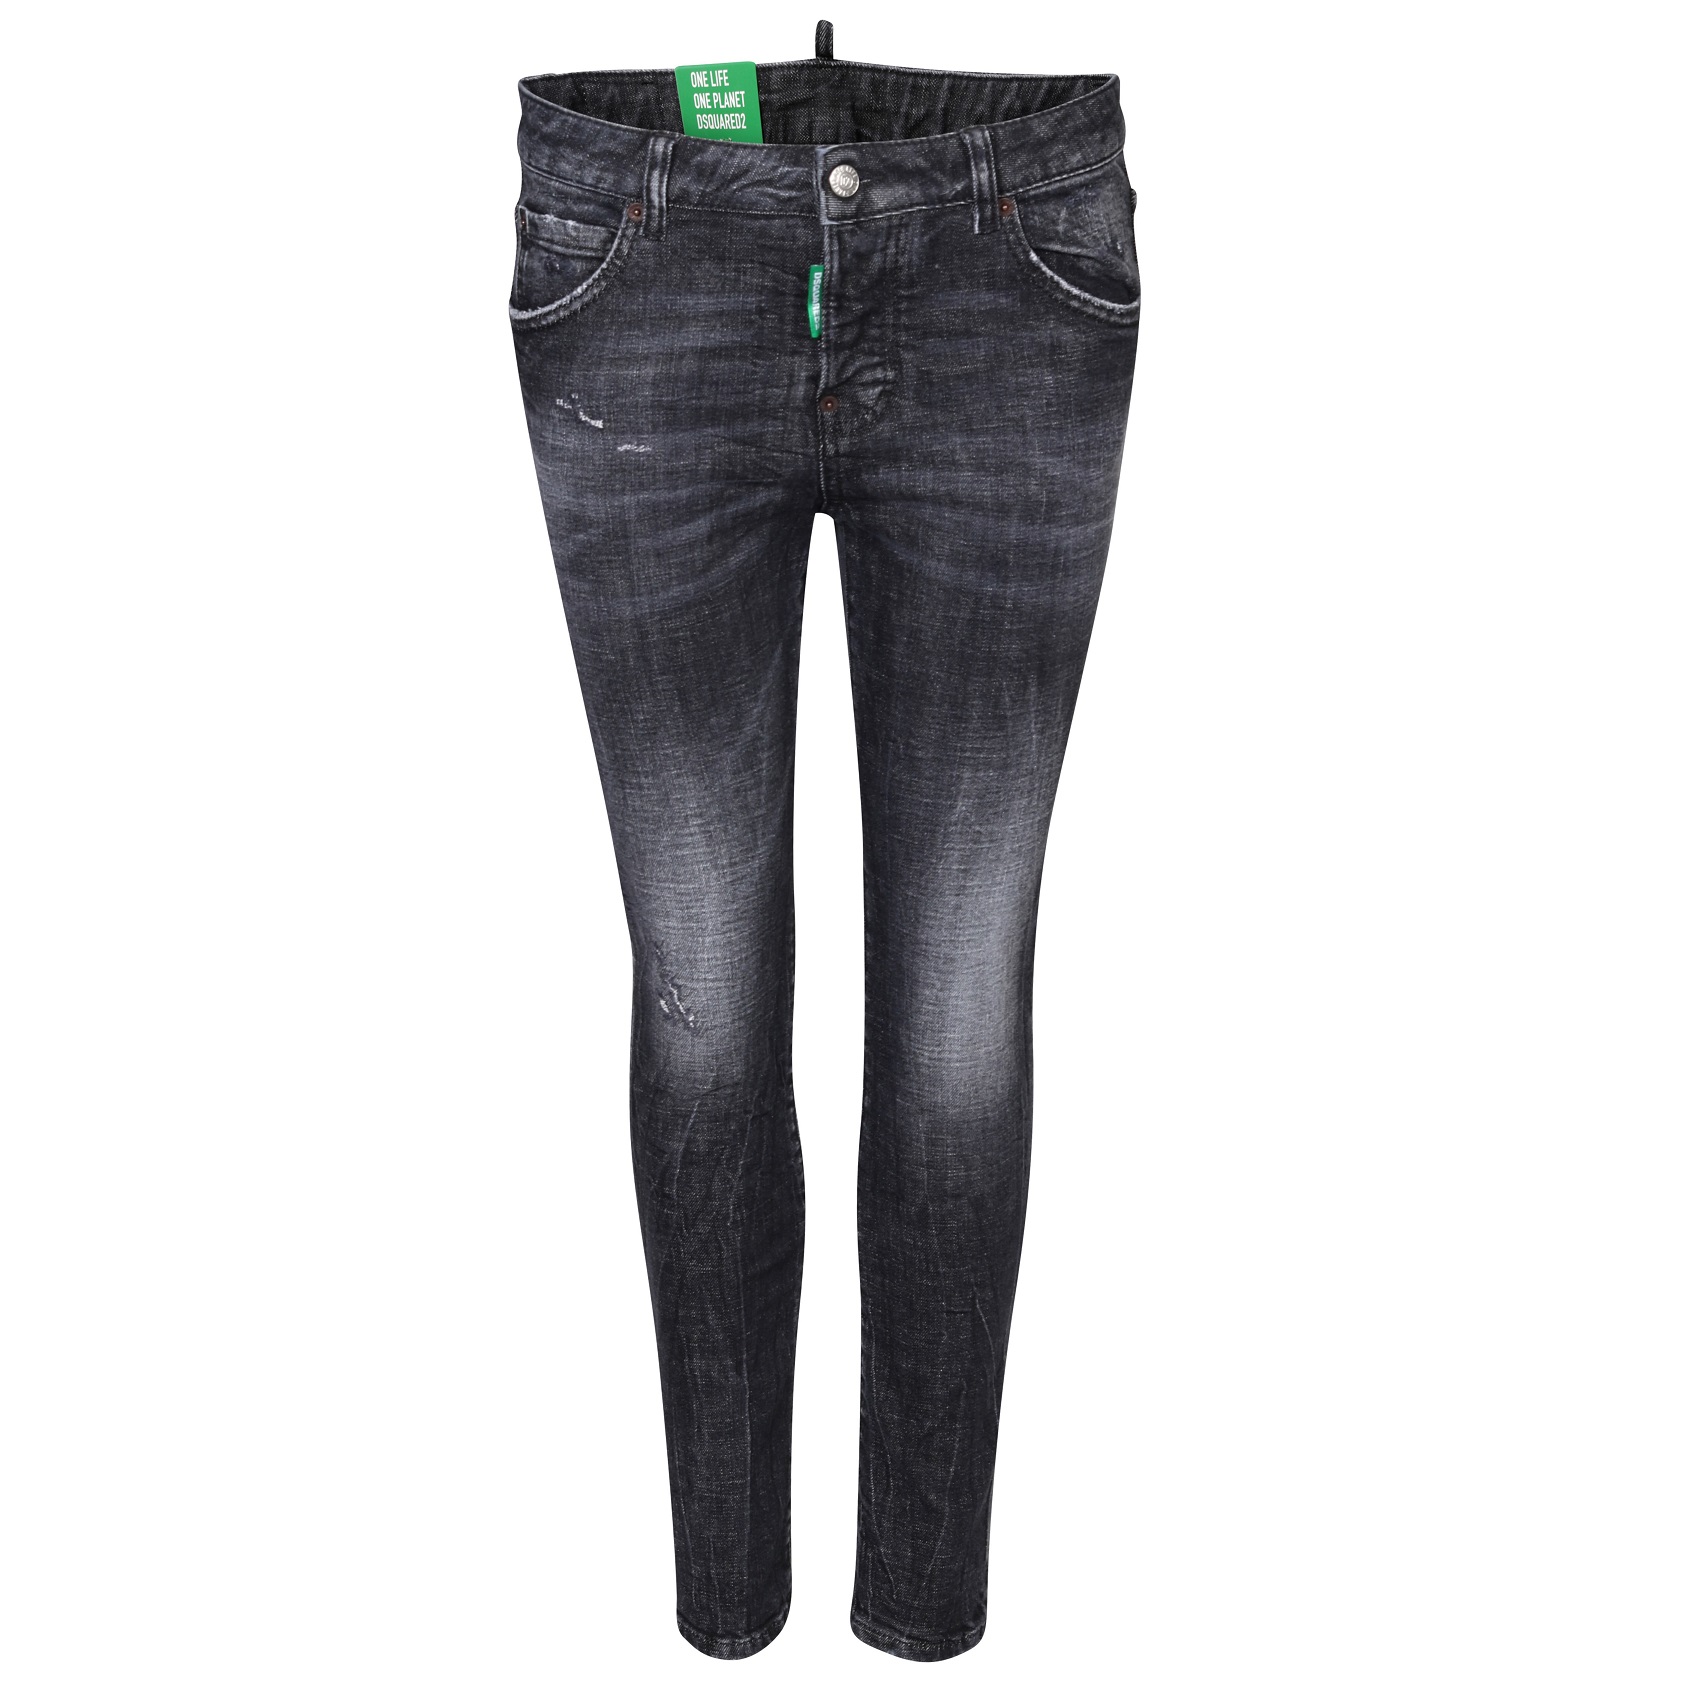 DSQUARED2 Jeans Cool Girl Green Label in Washed Black